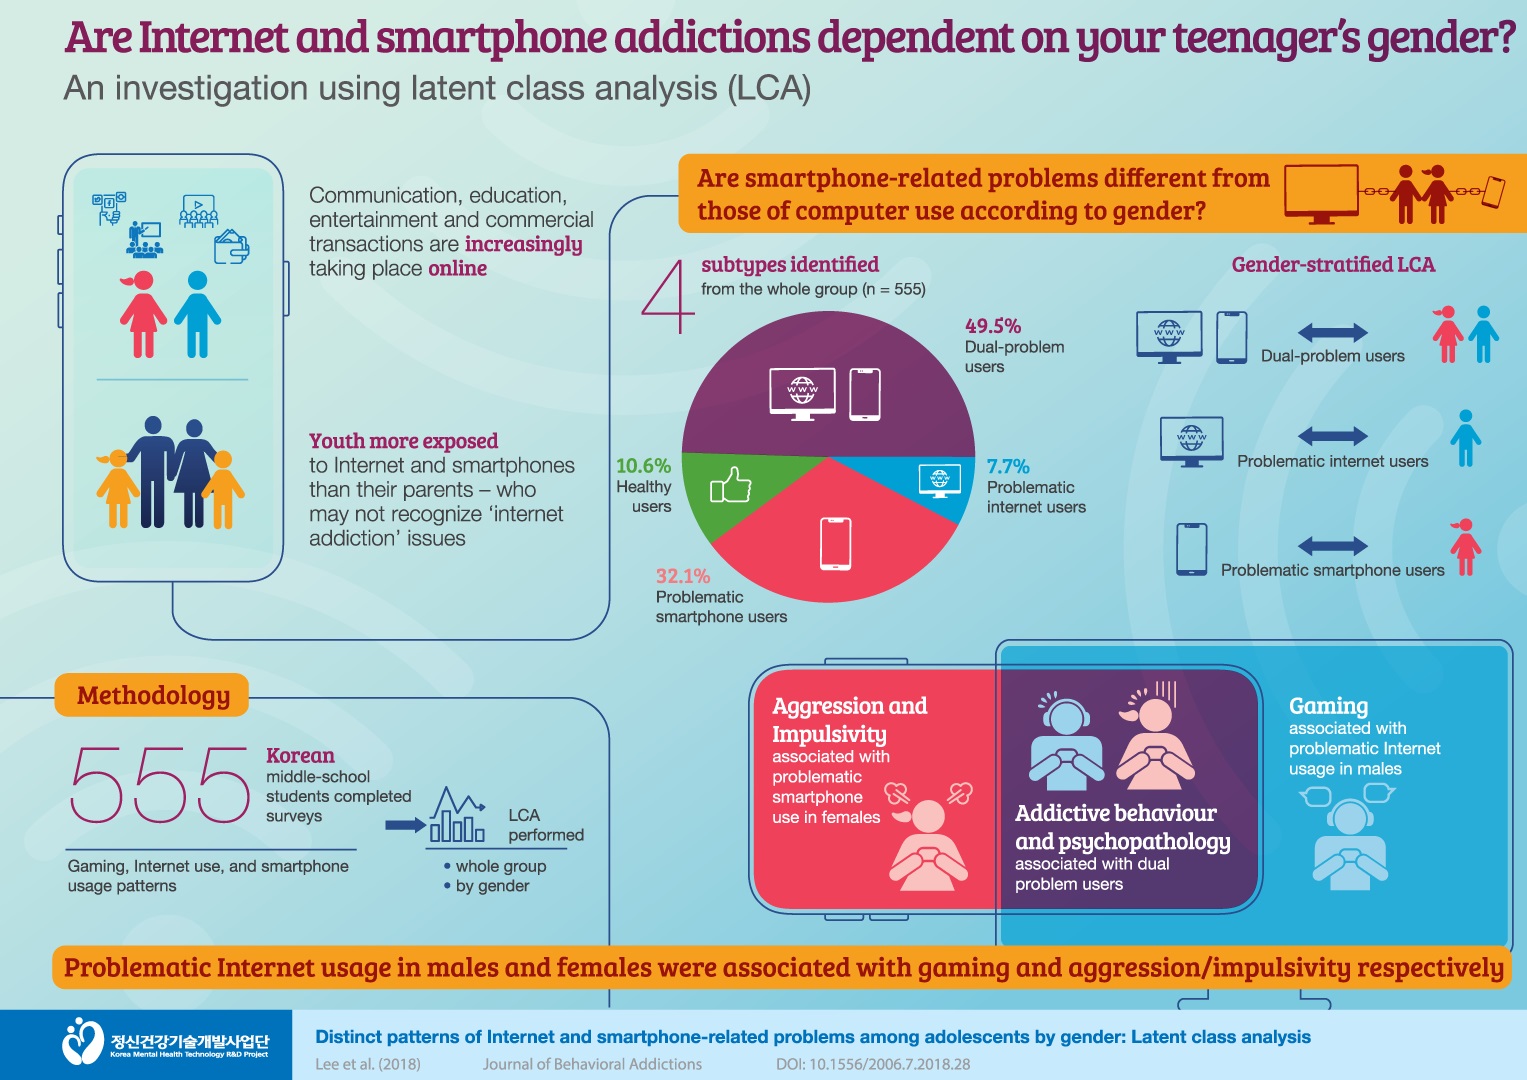 2. Are Internet and smartphone addictions dependent on your teenager´s gender?